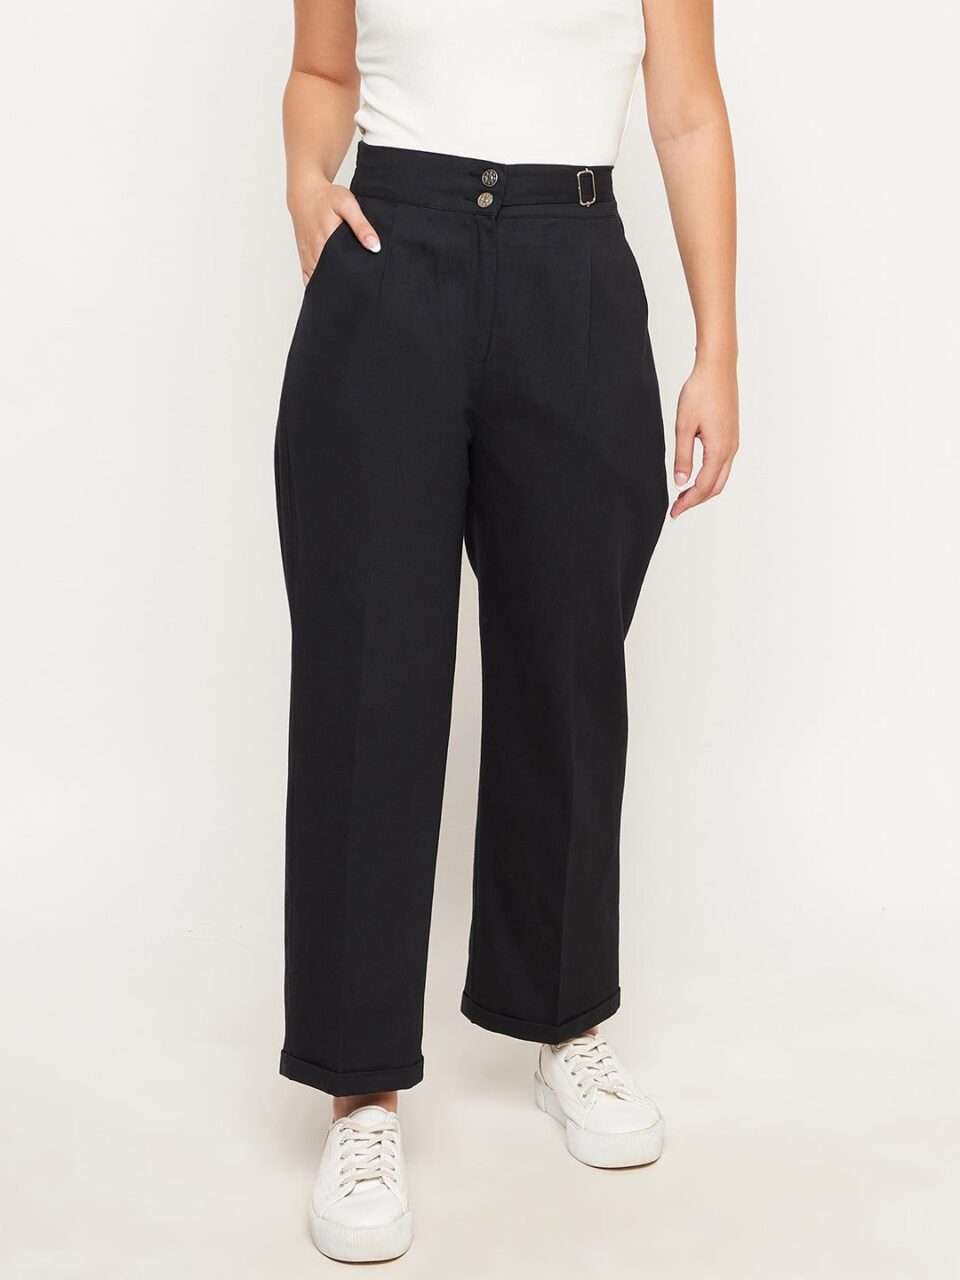 Black Trouser With Buckle